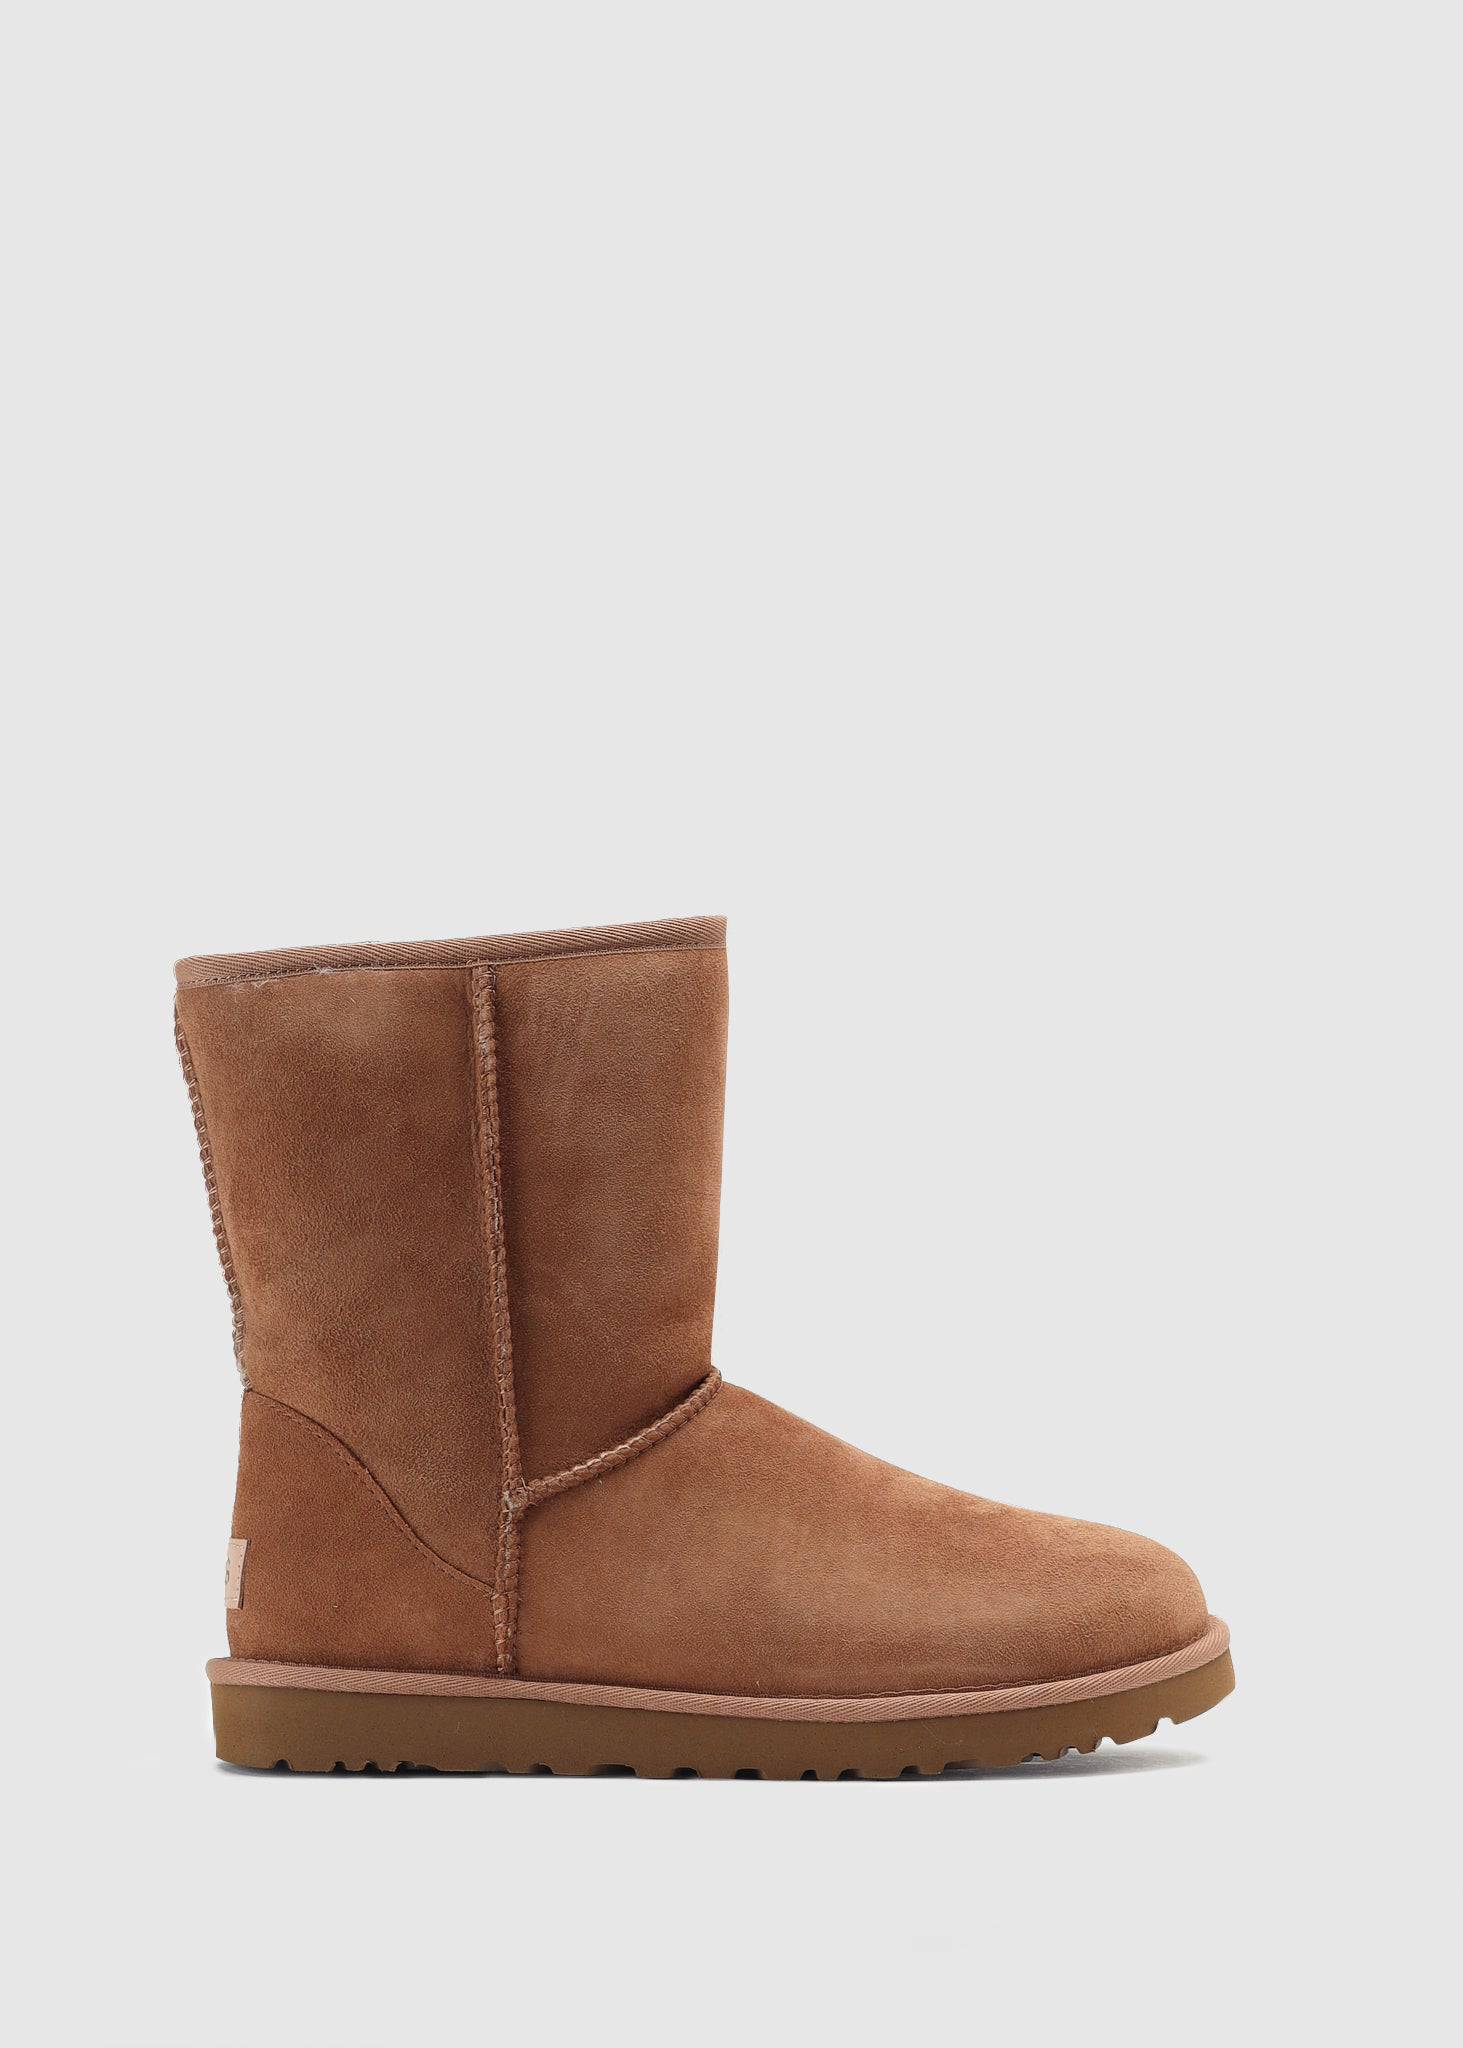 Ugg Womens Classic Short II Boots In Chestnut - Brown